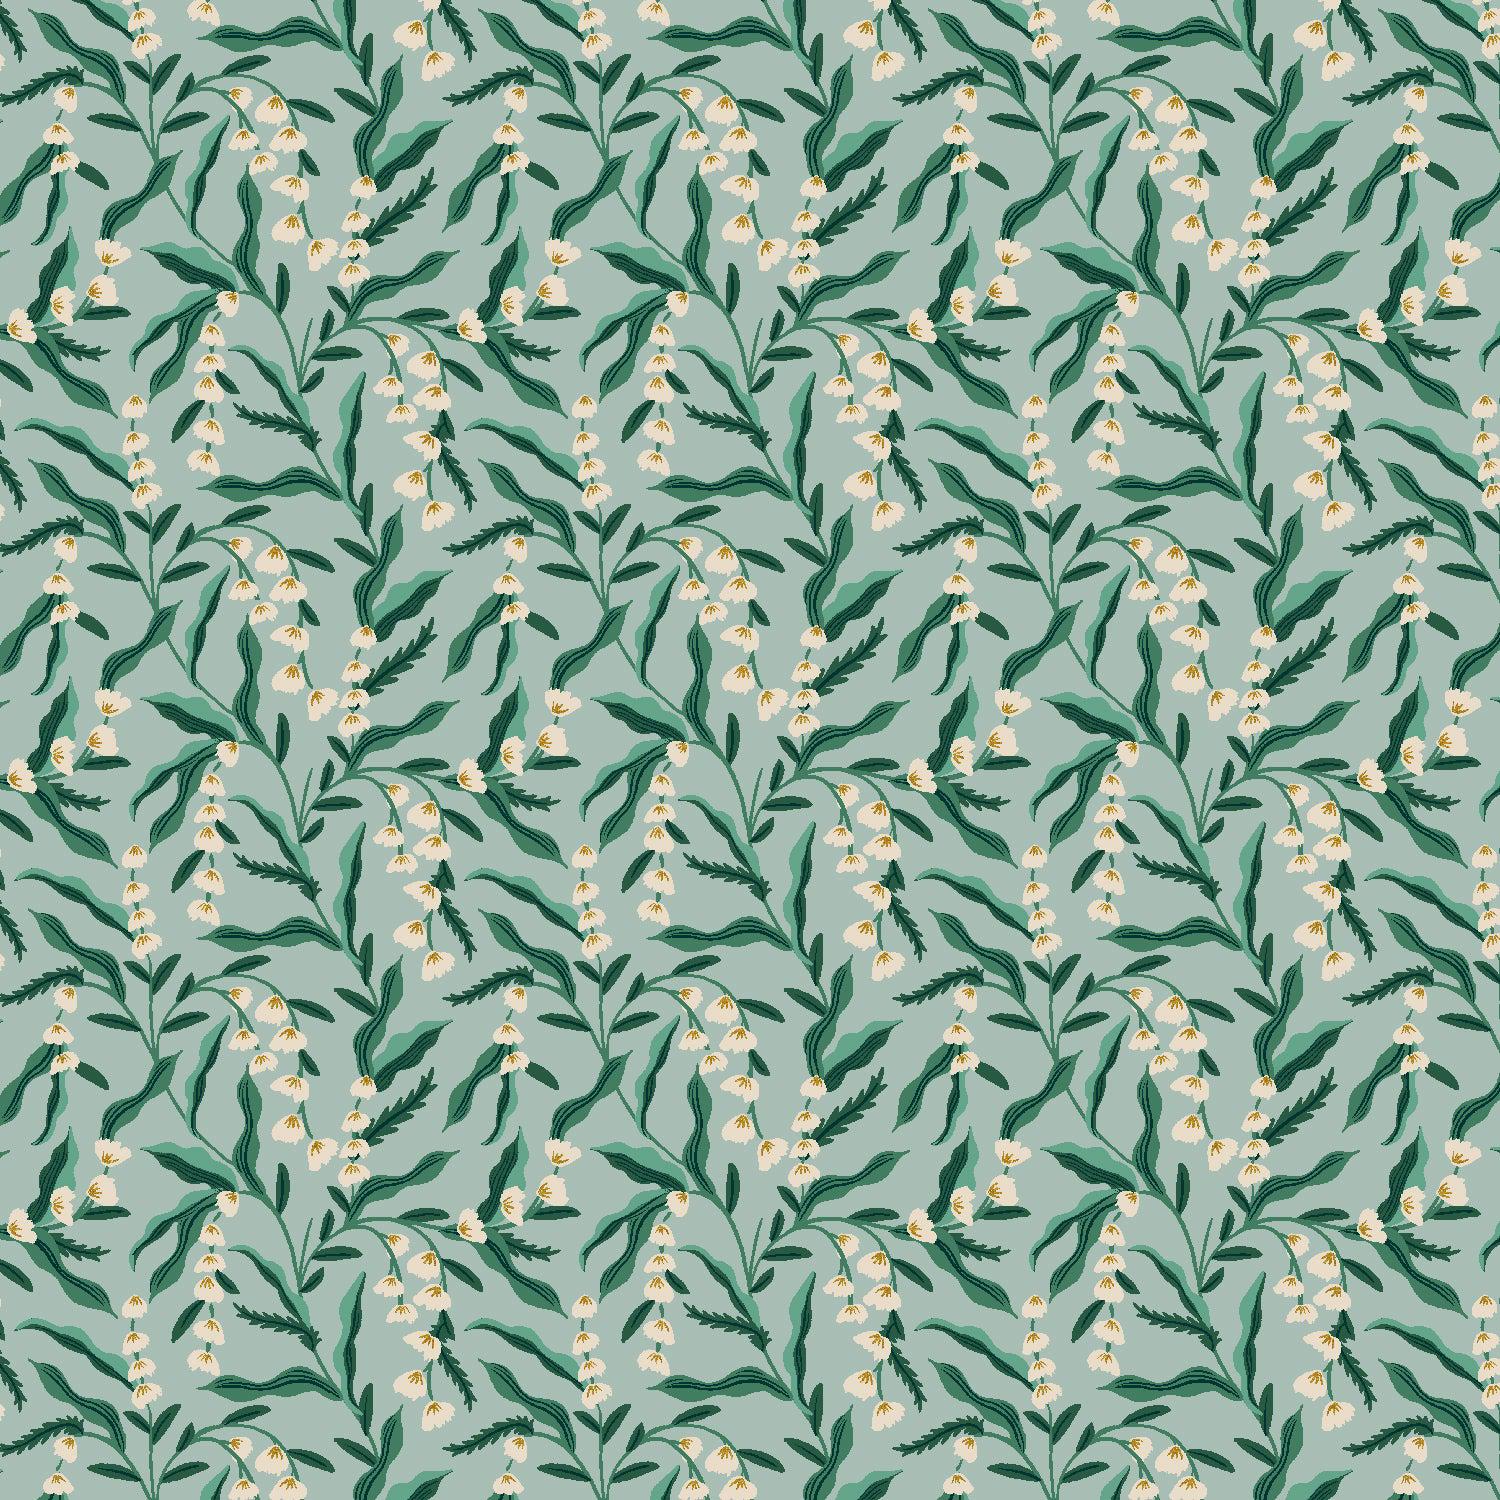 Cotton + Steel-Lily Mint Metallic-fabric-gather here online